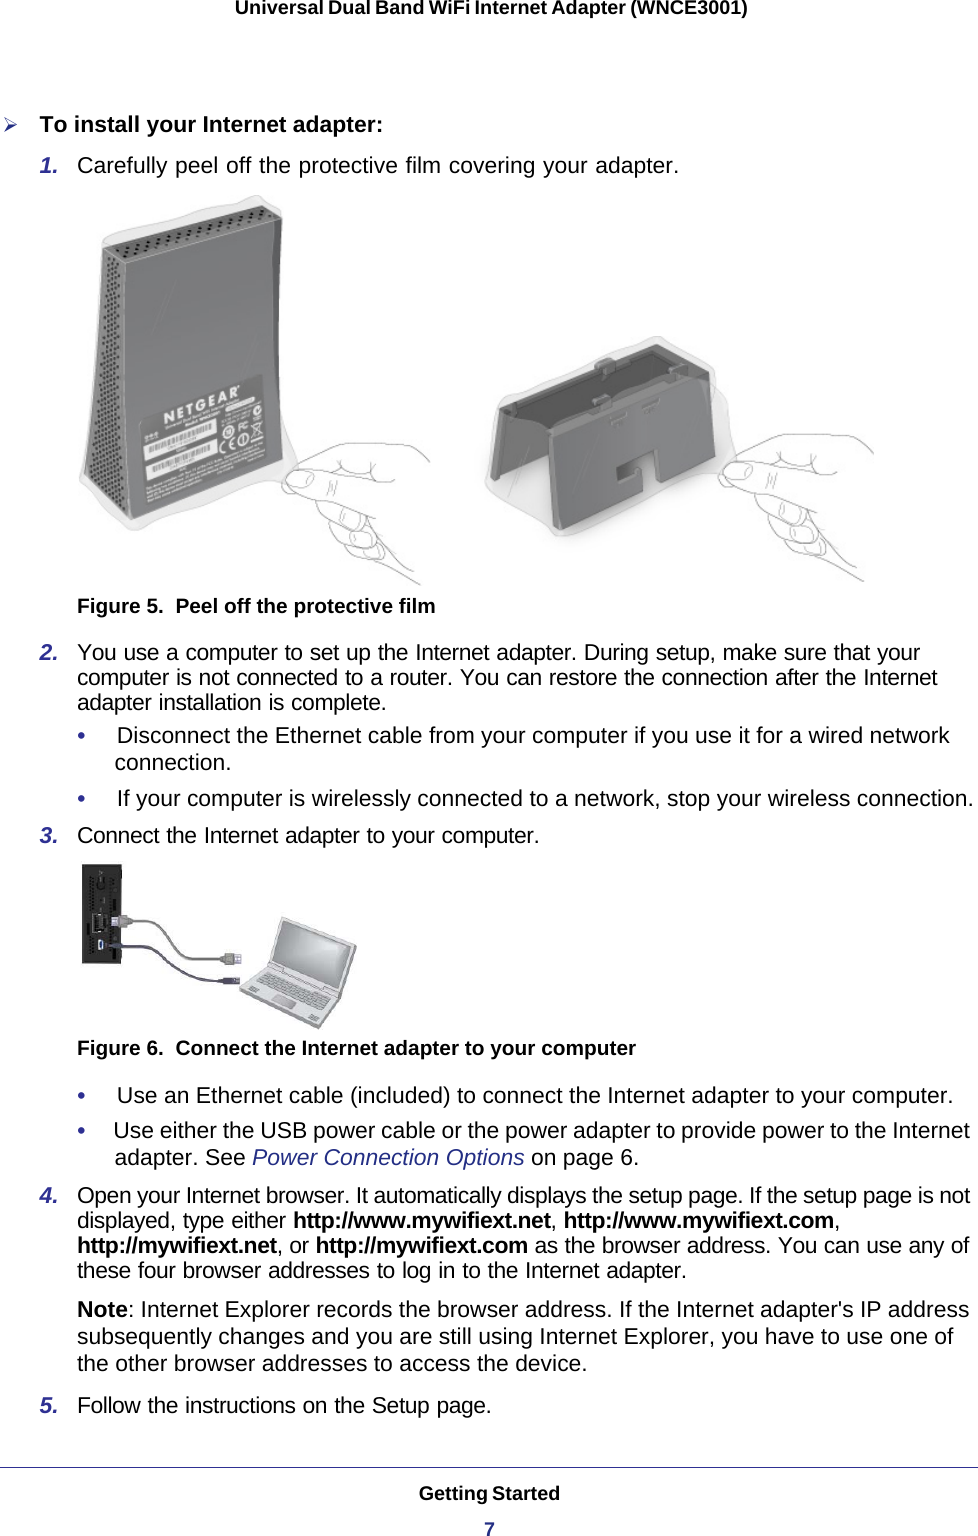 Getting Started7 Universal Dual Band WiFi Internet Adapter (WNCE3001)To install your Internet adapter:1.  Carefully peel off the protective film covering your adapter.Figure 5.  Peel off the protective film2.  You use a computer to set up the Internet adapter. During setup, make sure that your computer is not connected to a router. You can restore the connection after the Internet adapter installation is complete.•     Disconnect the Ethernet cable from your computer if you use it for a wired network connection.•     If your computer is wirelessly connected to a network, stop your wireless connection.3.  Connect the Internet adapter to your computer.Figure 6.  Connect the Internet adapter to your computer•     Use an Ethernet cable (included) to connect the Internet adapter to your computer.•     Use either the USB power cable or the power adapter to provide power to the Internet adapter. See Power Connection Options on page  6.4.  Open your Internet browser. It automatically displays the setup page. If the setup page is not displayed, type either http://www.mywifiext.net, http://www.mywifiext.com, http://mywifiext.net, or http://mywifiext.com as the browser address. You can use any of these four browser addresses to log in to the Internet adapter. Note: Internet Explorer records the browser address. If the Internet adapter&apos;s IP address subsequently changes and you are still using Internet Explorer, you have to use one of the other browser addresses to access the device.5.  Follow the instructions on the Setup page.